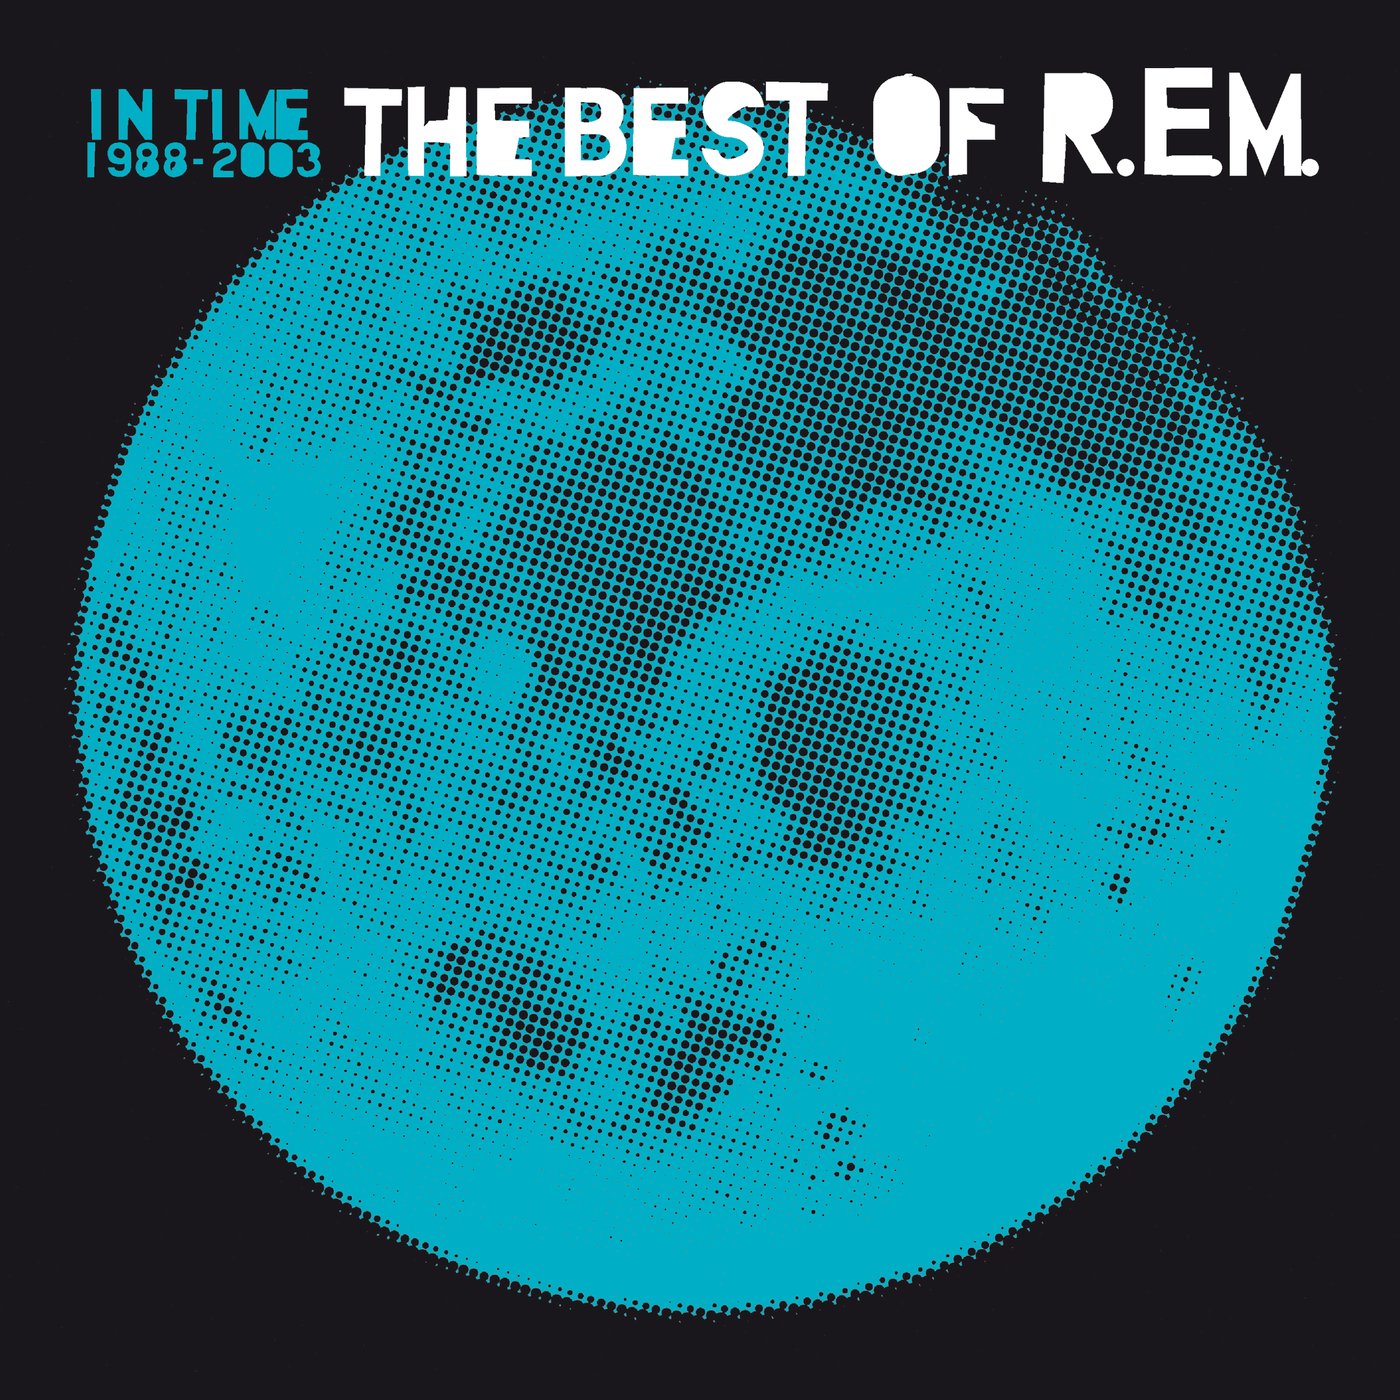 R.E.M.-In Time: The Best Of R.E.M. 1988-2003 LP vinil - Salvaje Music Store MEXICO